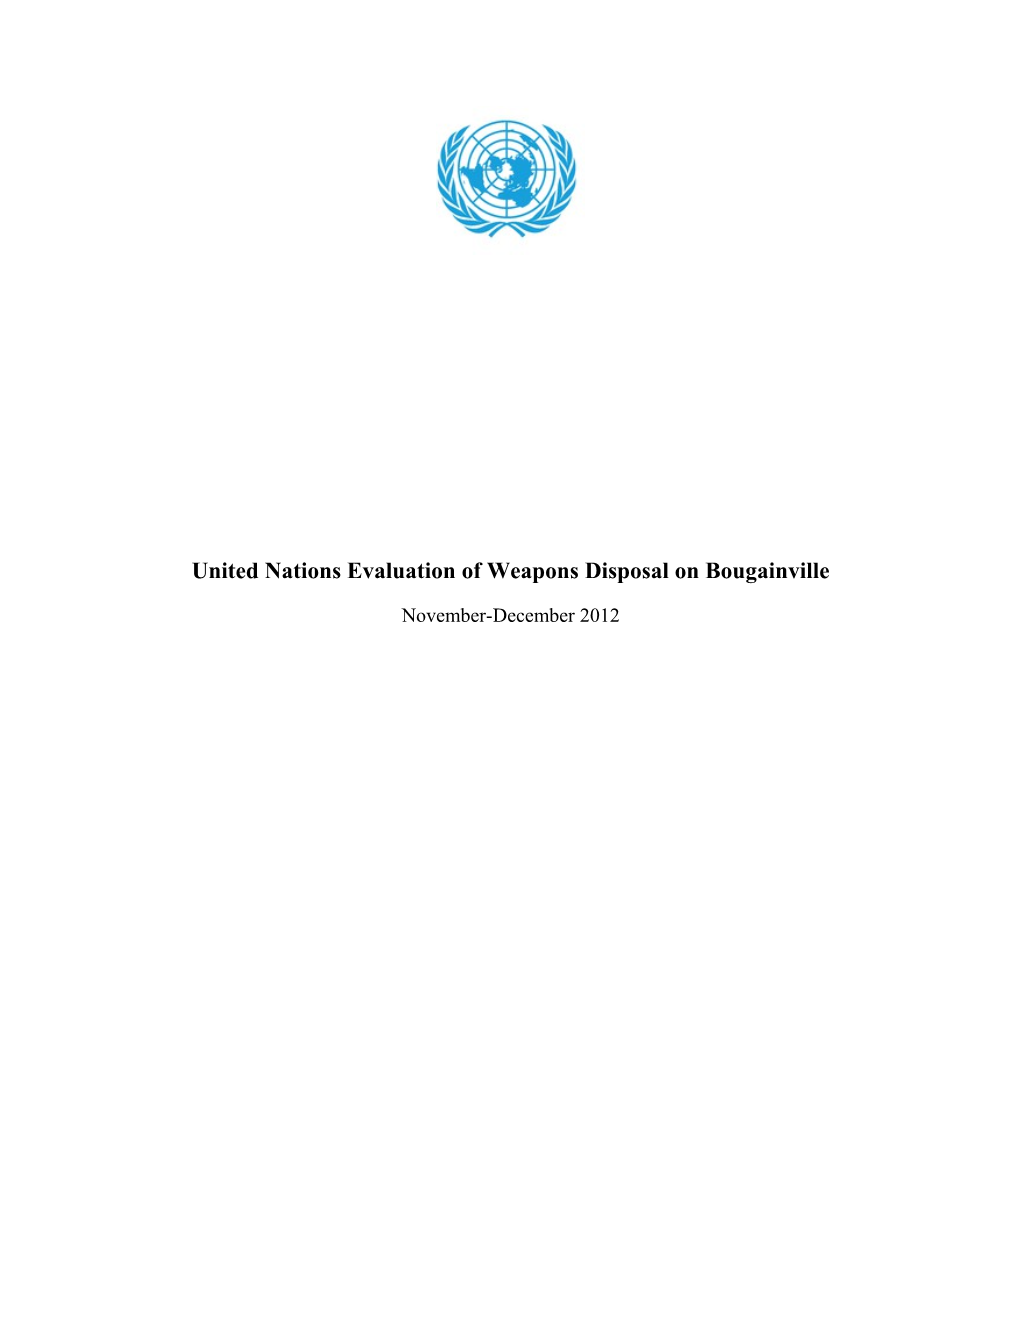 United Nations Evaluation of Weapons Disposal on Bougainville